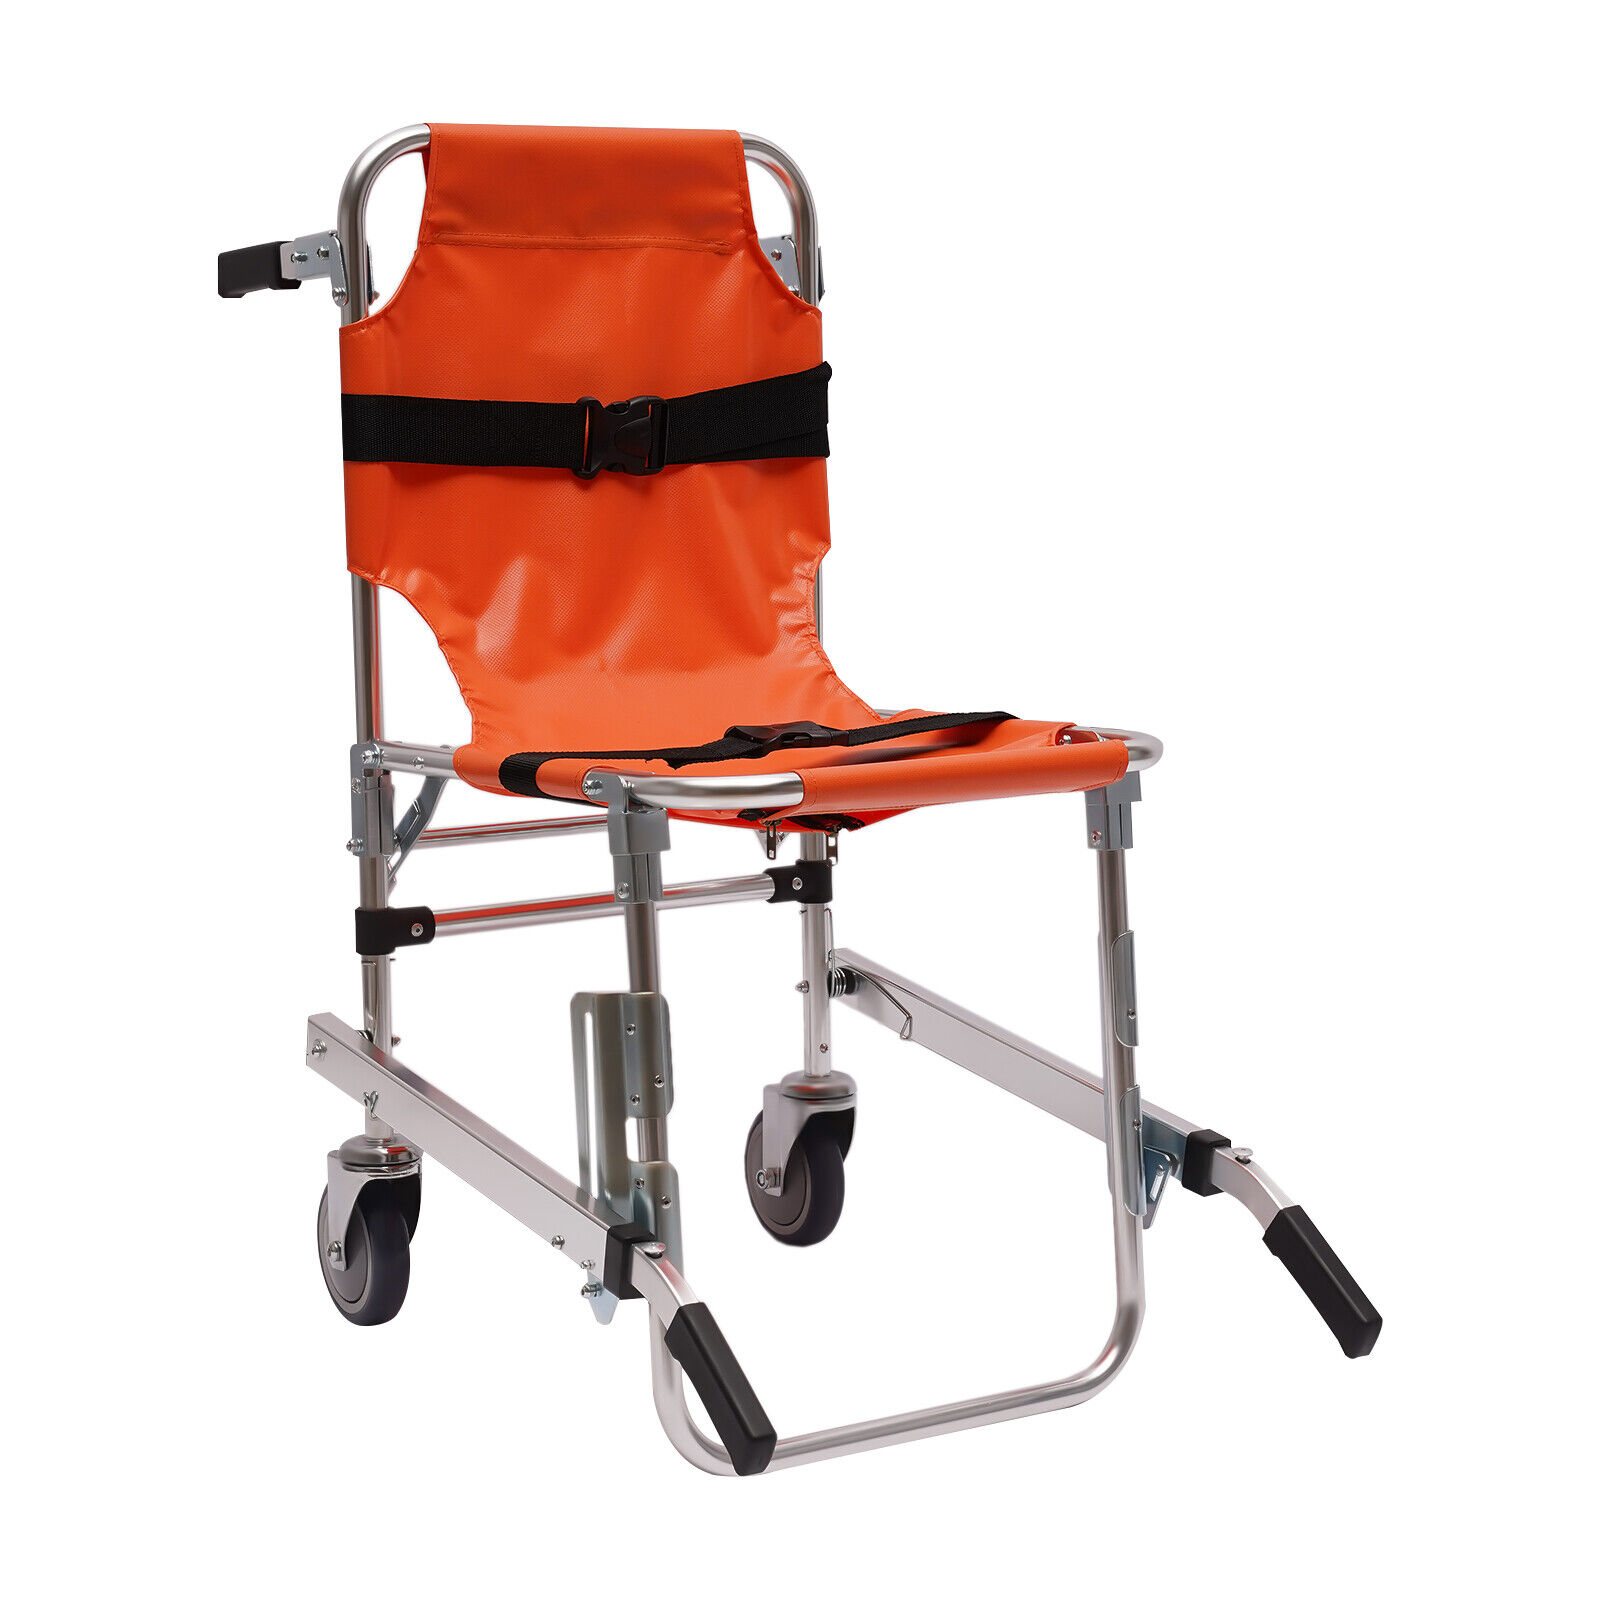 EMS Stair Chair Medical Emergency Evacuation Lifting Climbing Wheelchair 2 wheel Unbranded Does Not Apply - фотография #8